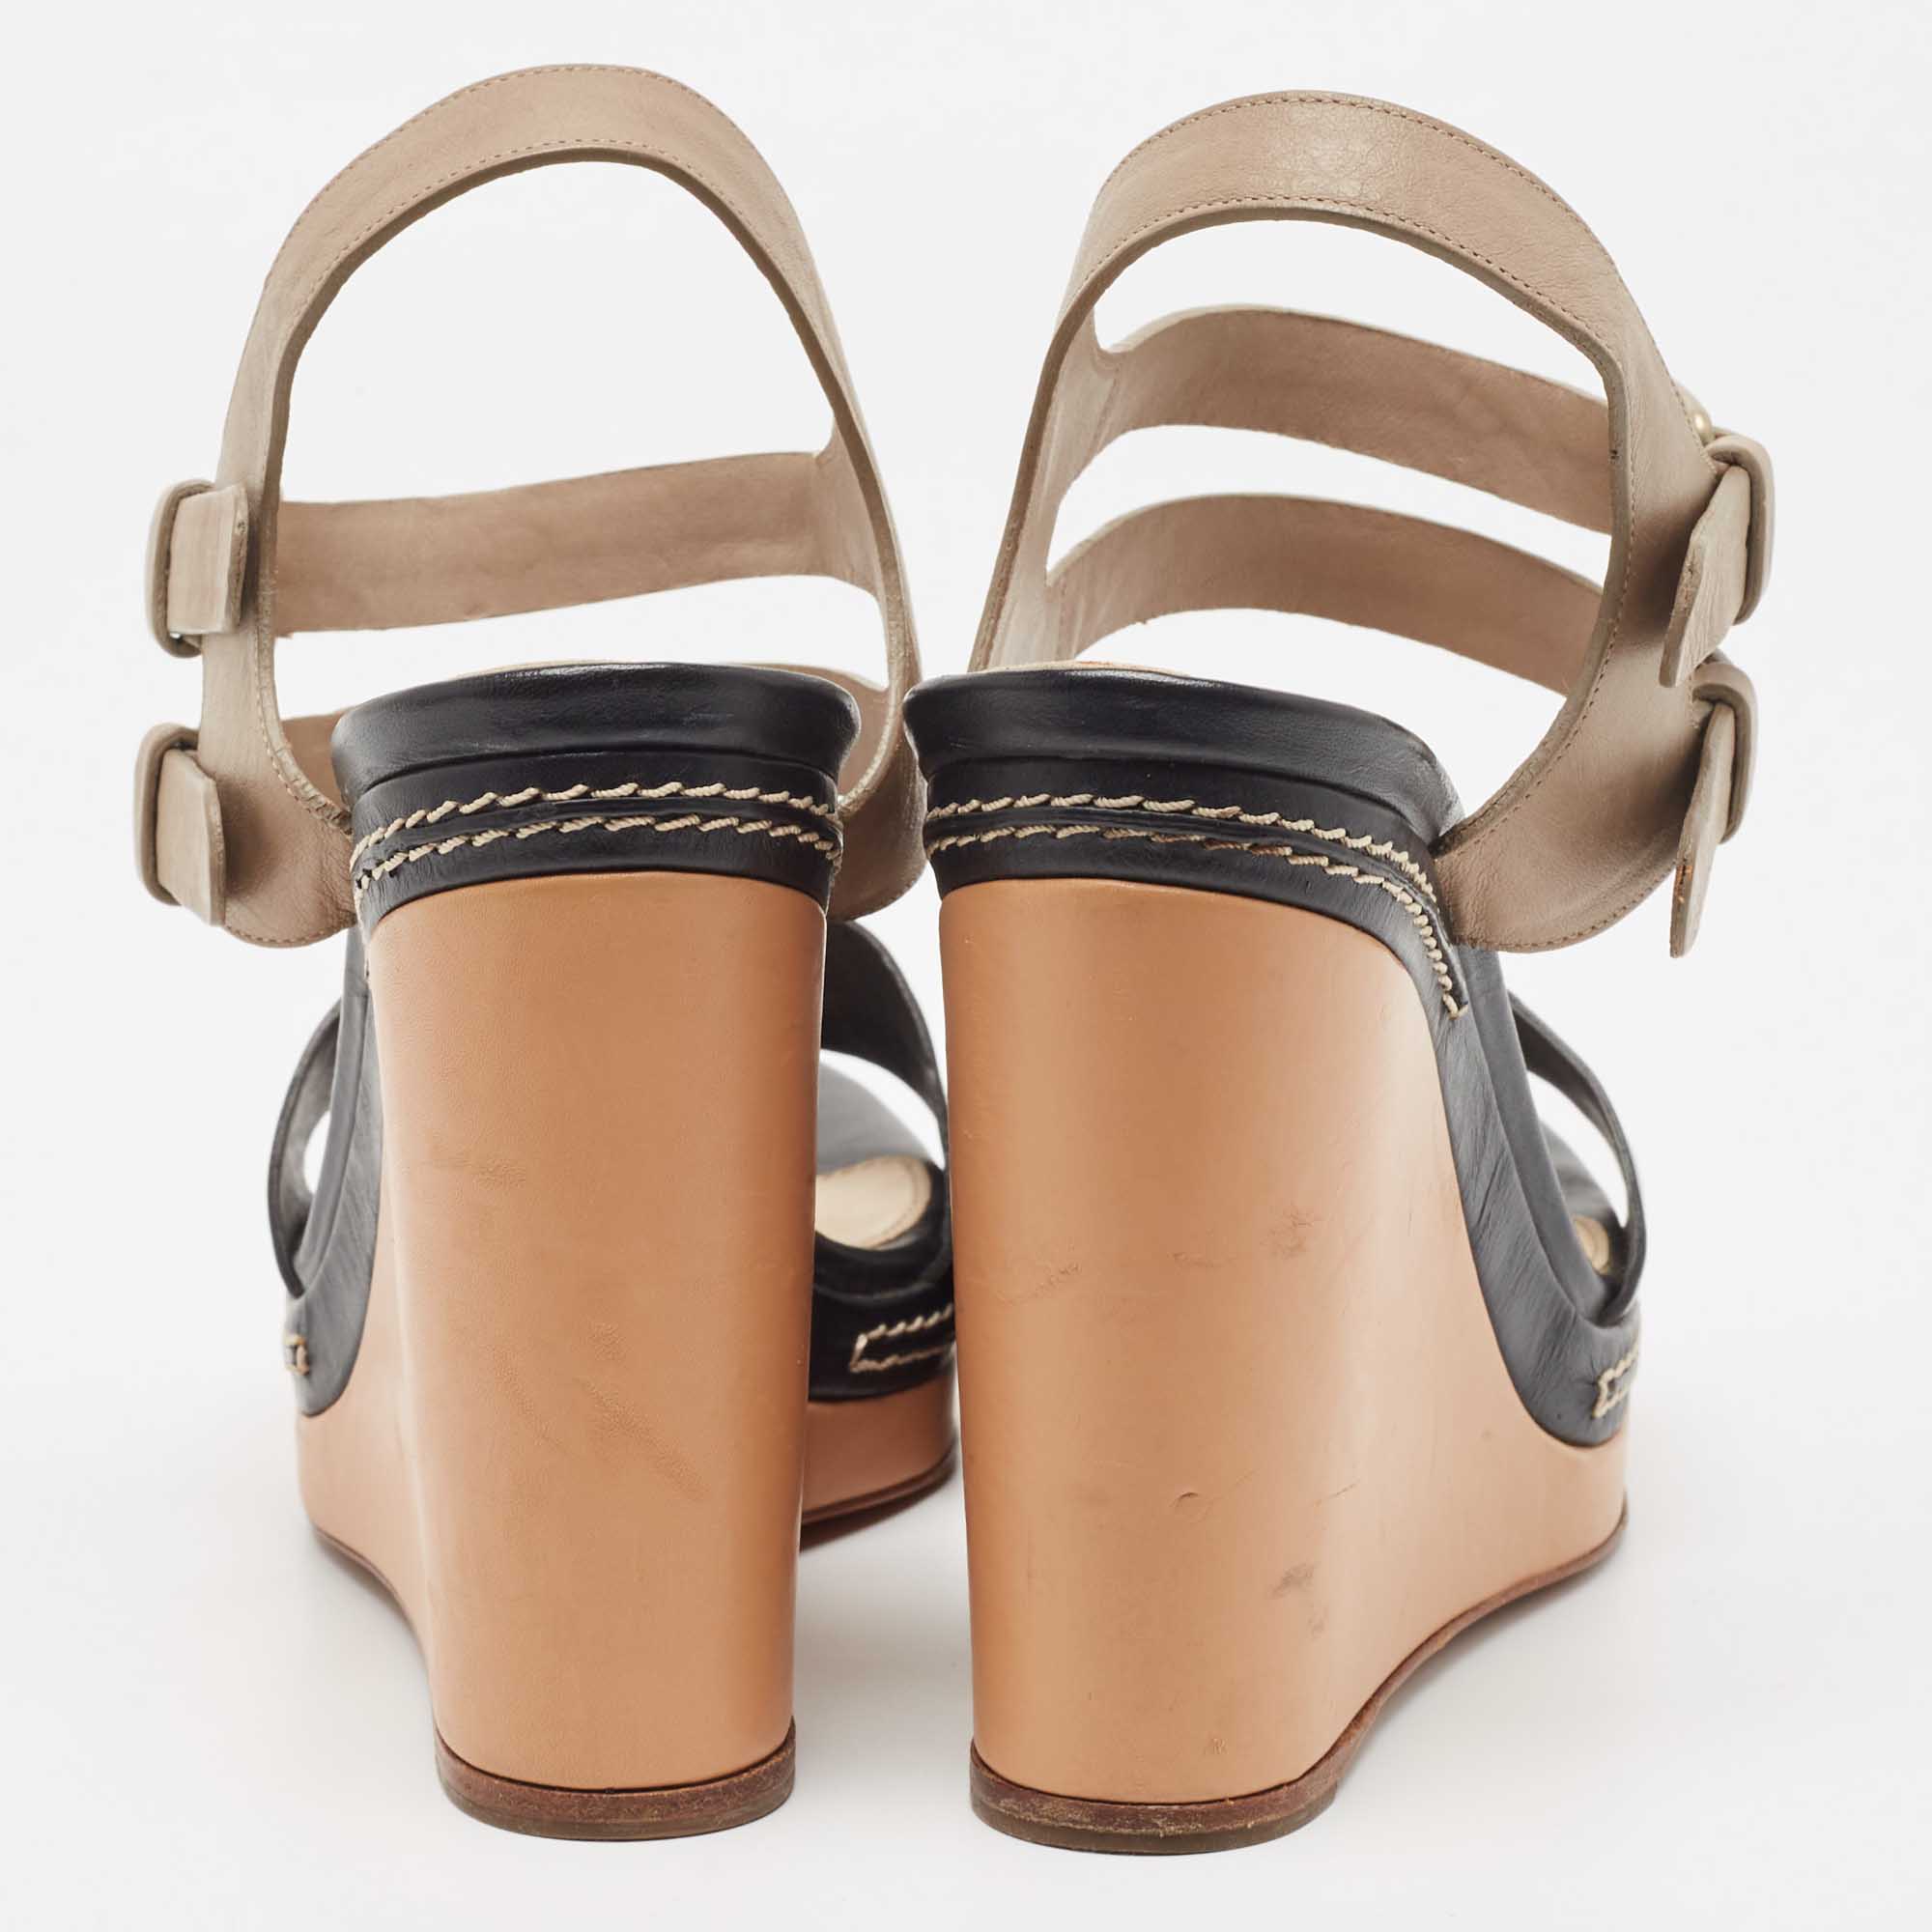 Chloe Black/Beige Leather Double Ankle Strap Wedge Sandals Size 40.5